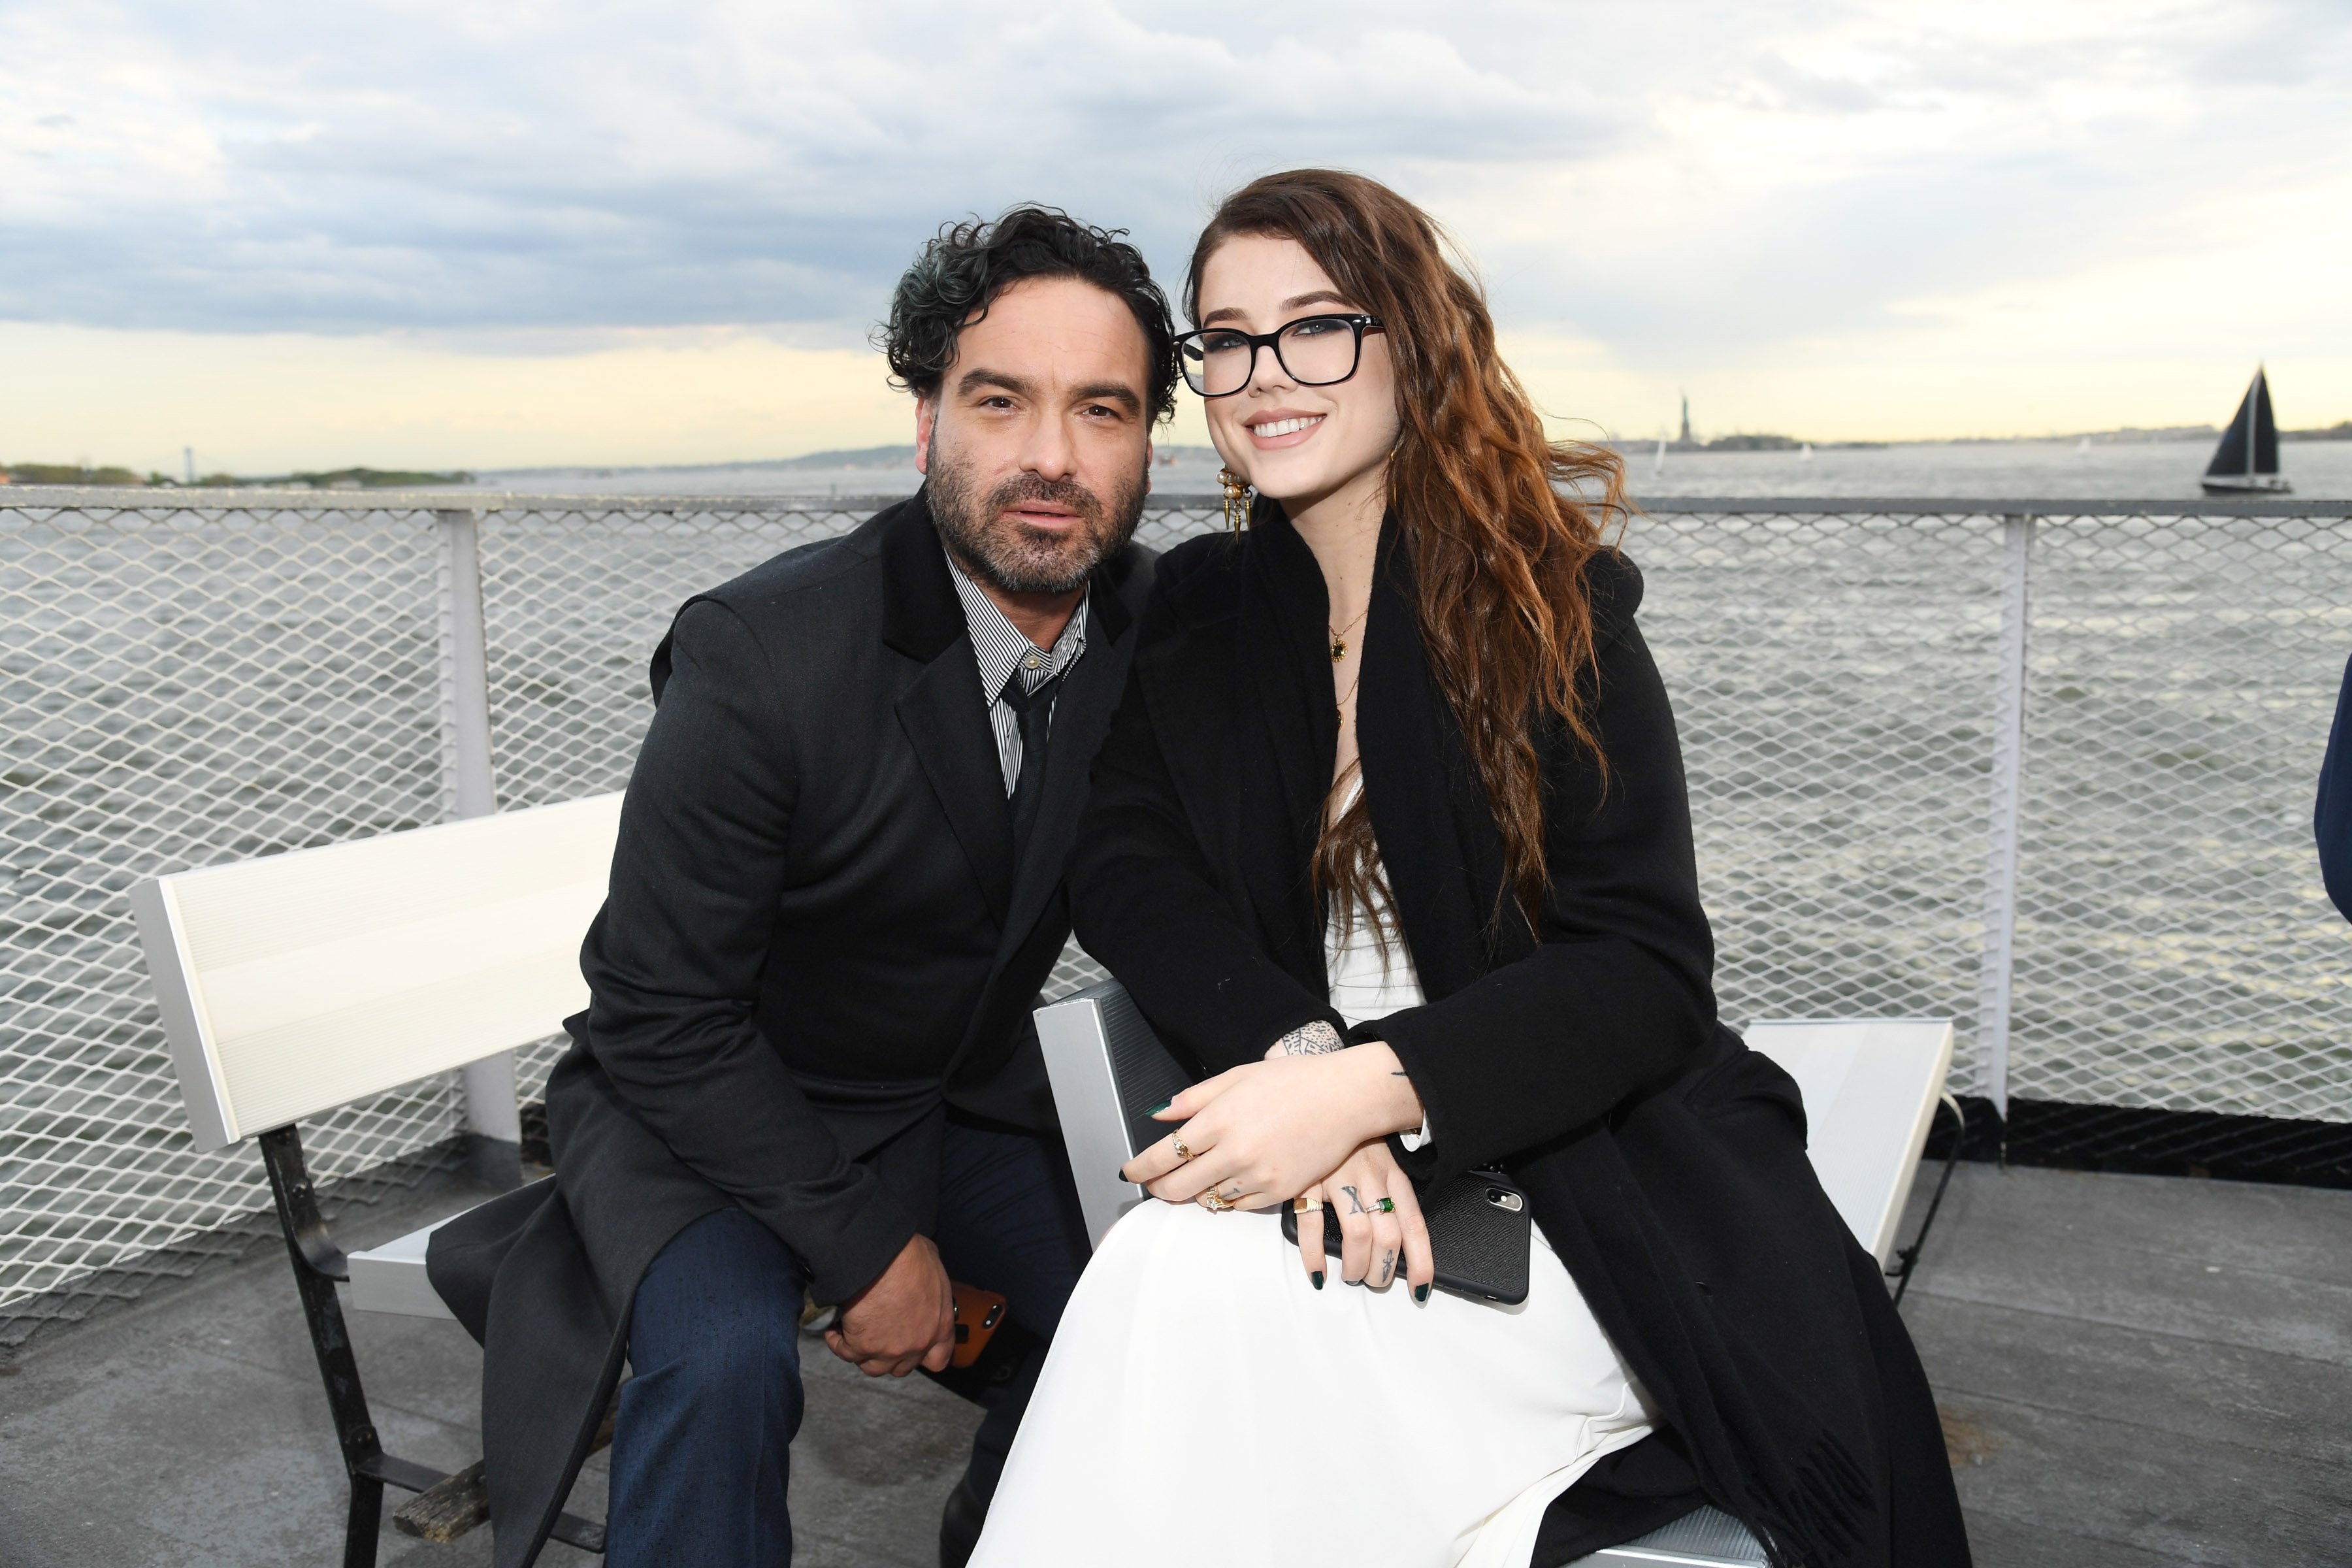 Johnny Galecki and Alaina Meyer attend the Statue Of Liberty Museum Opening Celebration at Battery Park on May 15, 2019 in New York City. | Source: Getty Images